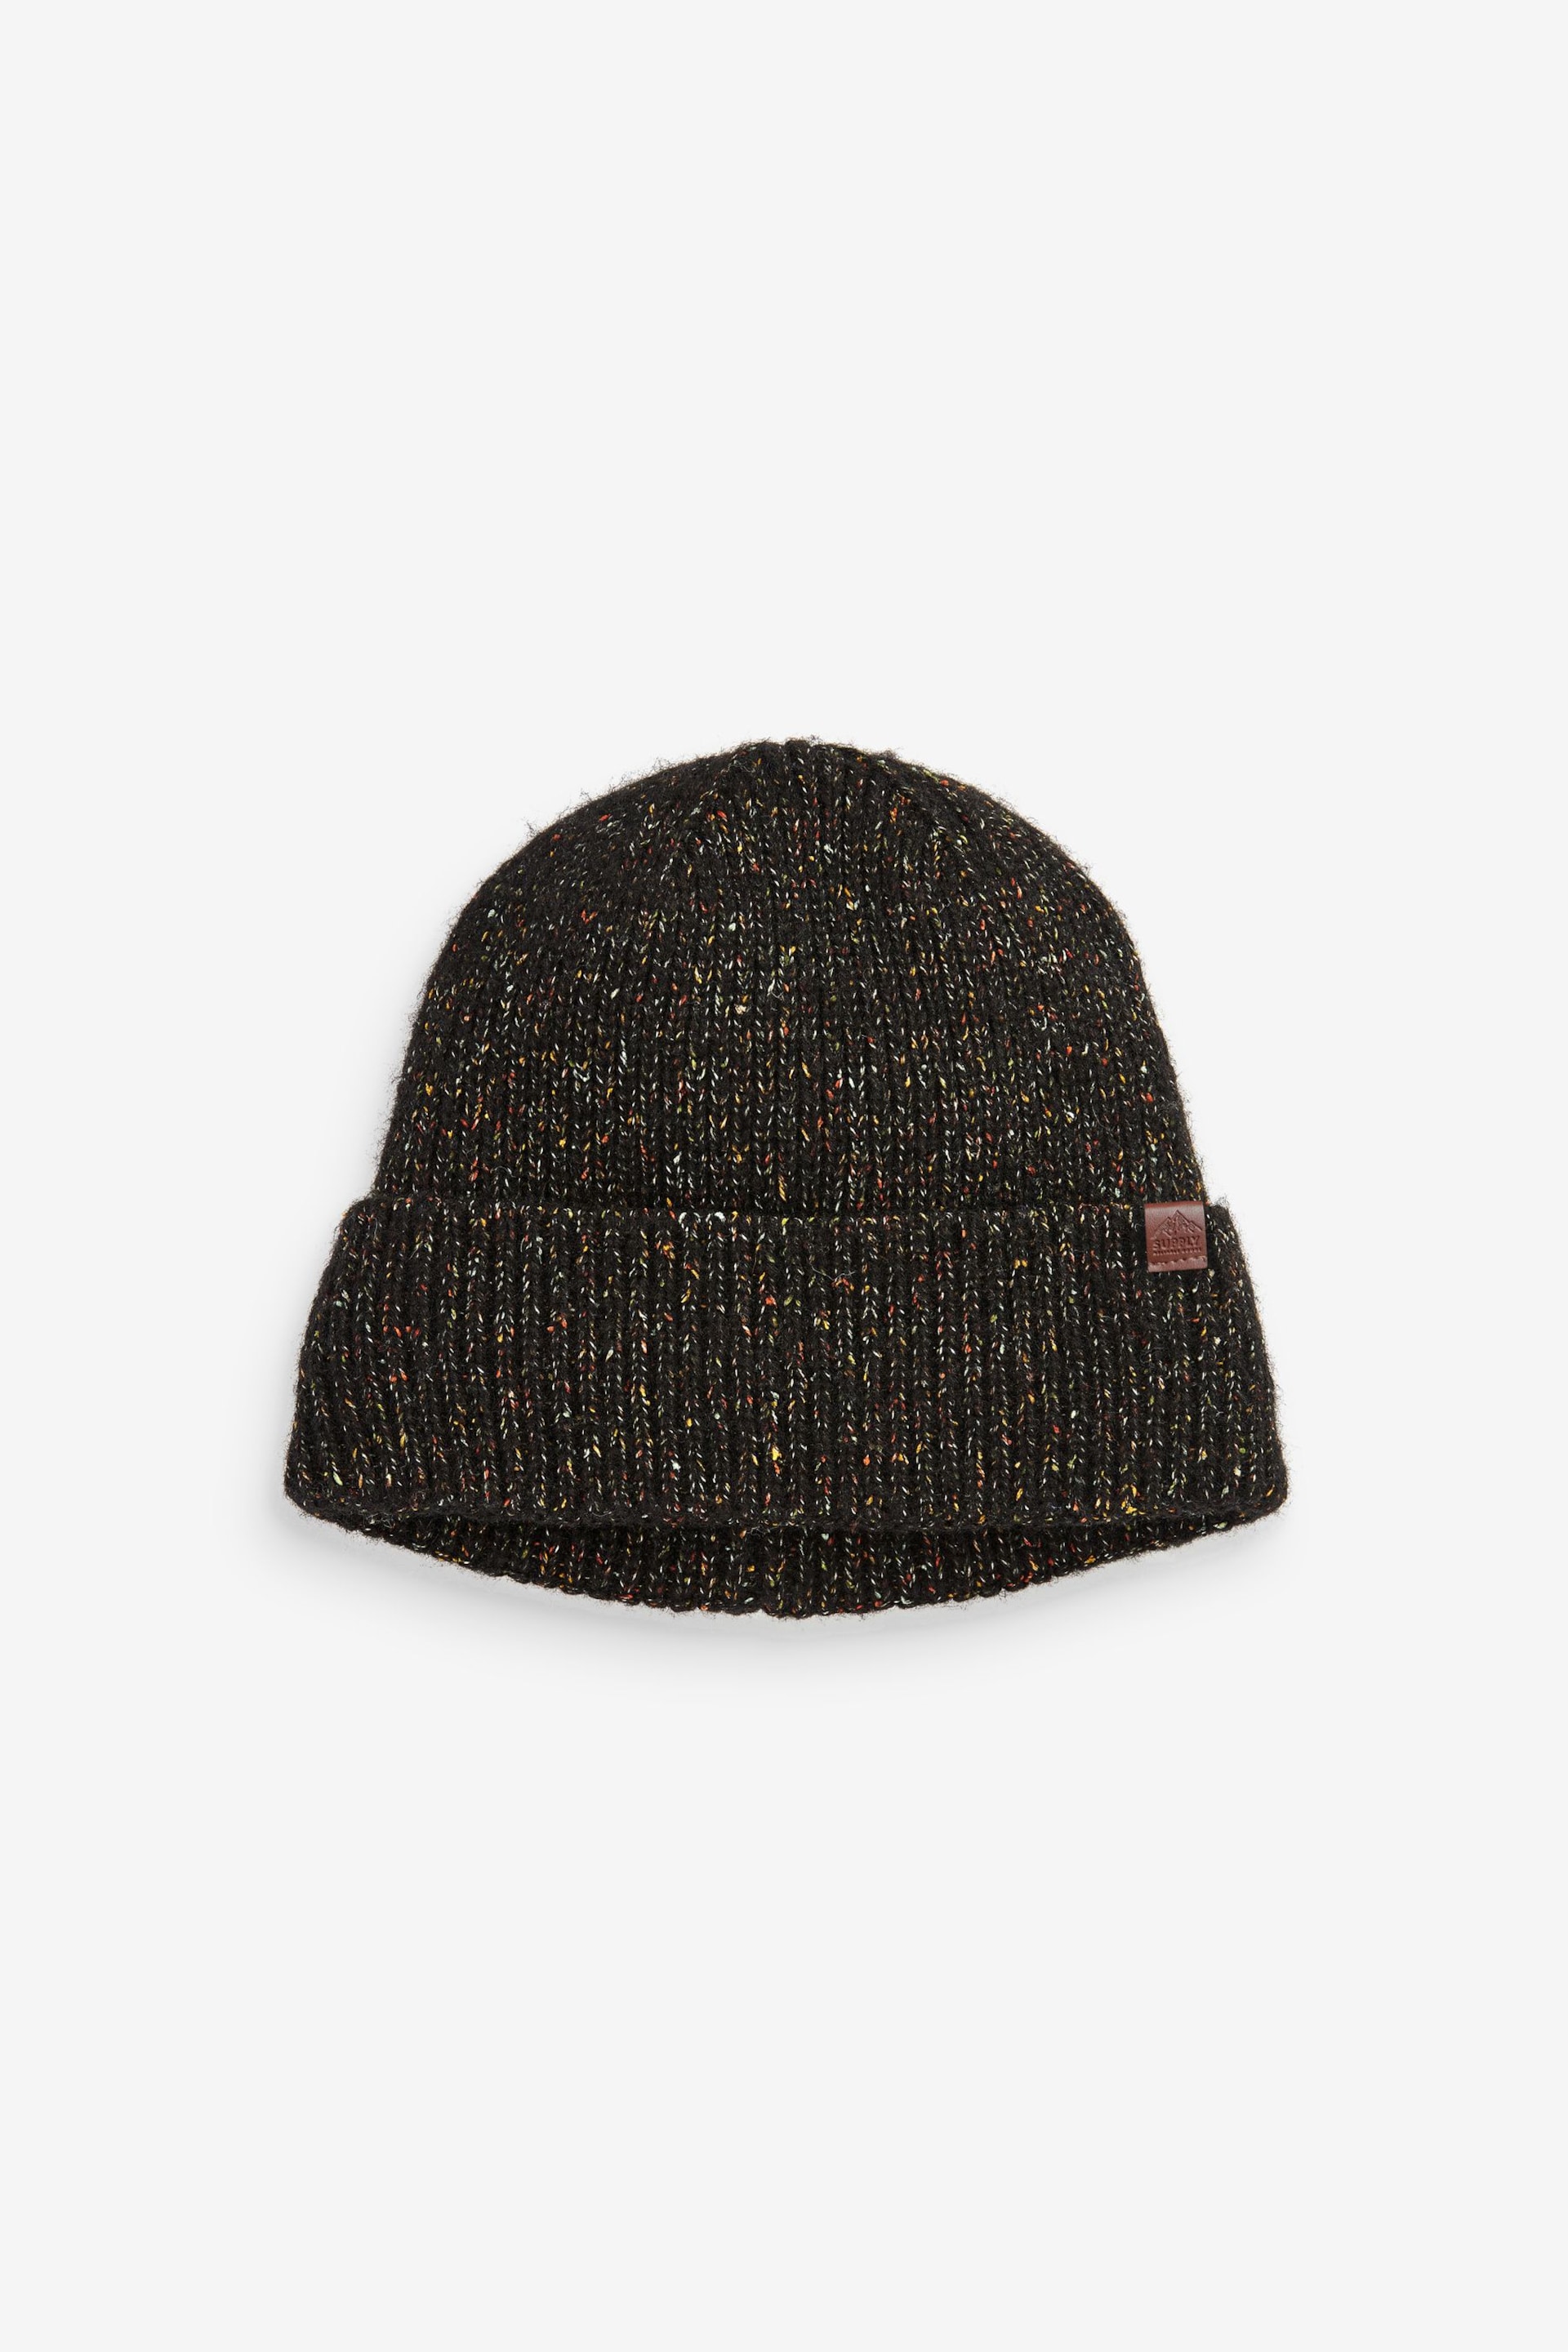 Black Textured Fleece Lined Beanie Hat - Image 2 of 3